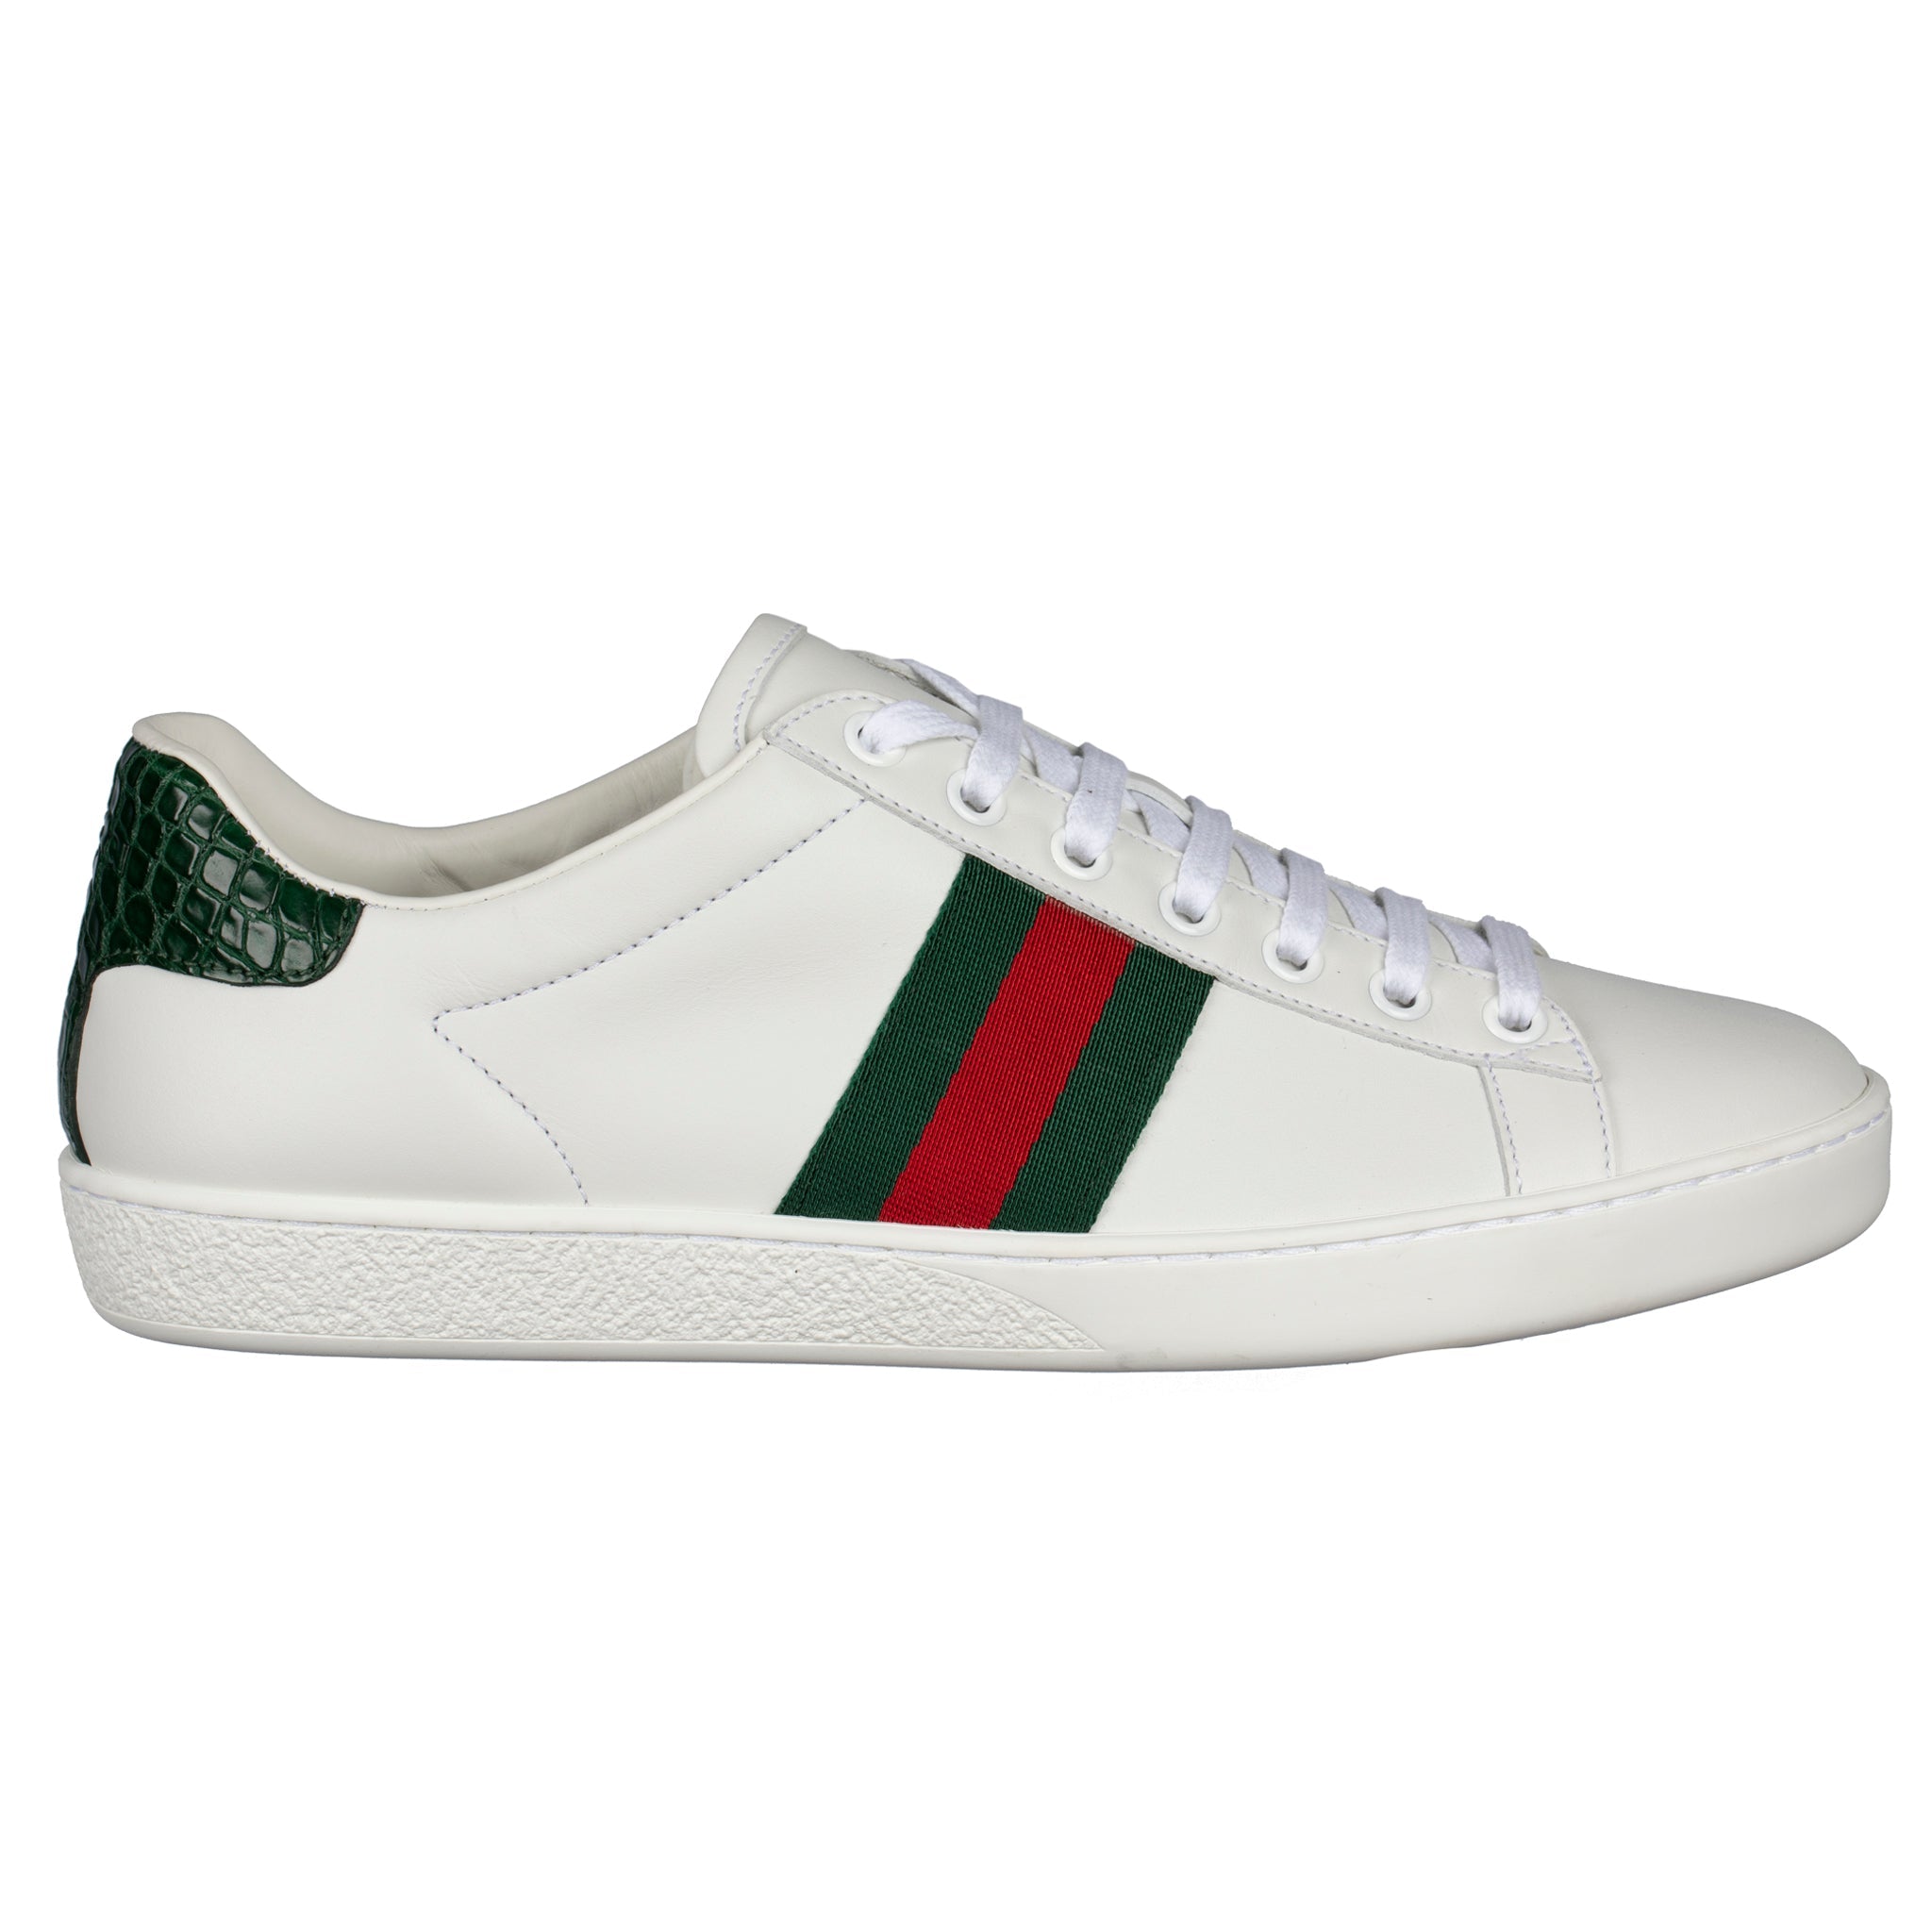 GUCCI ACE SNEAKER WHITE GREEN & RED STRIPE 38 IT - On Repeat